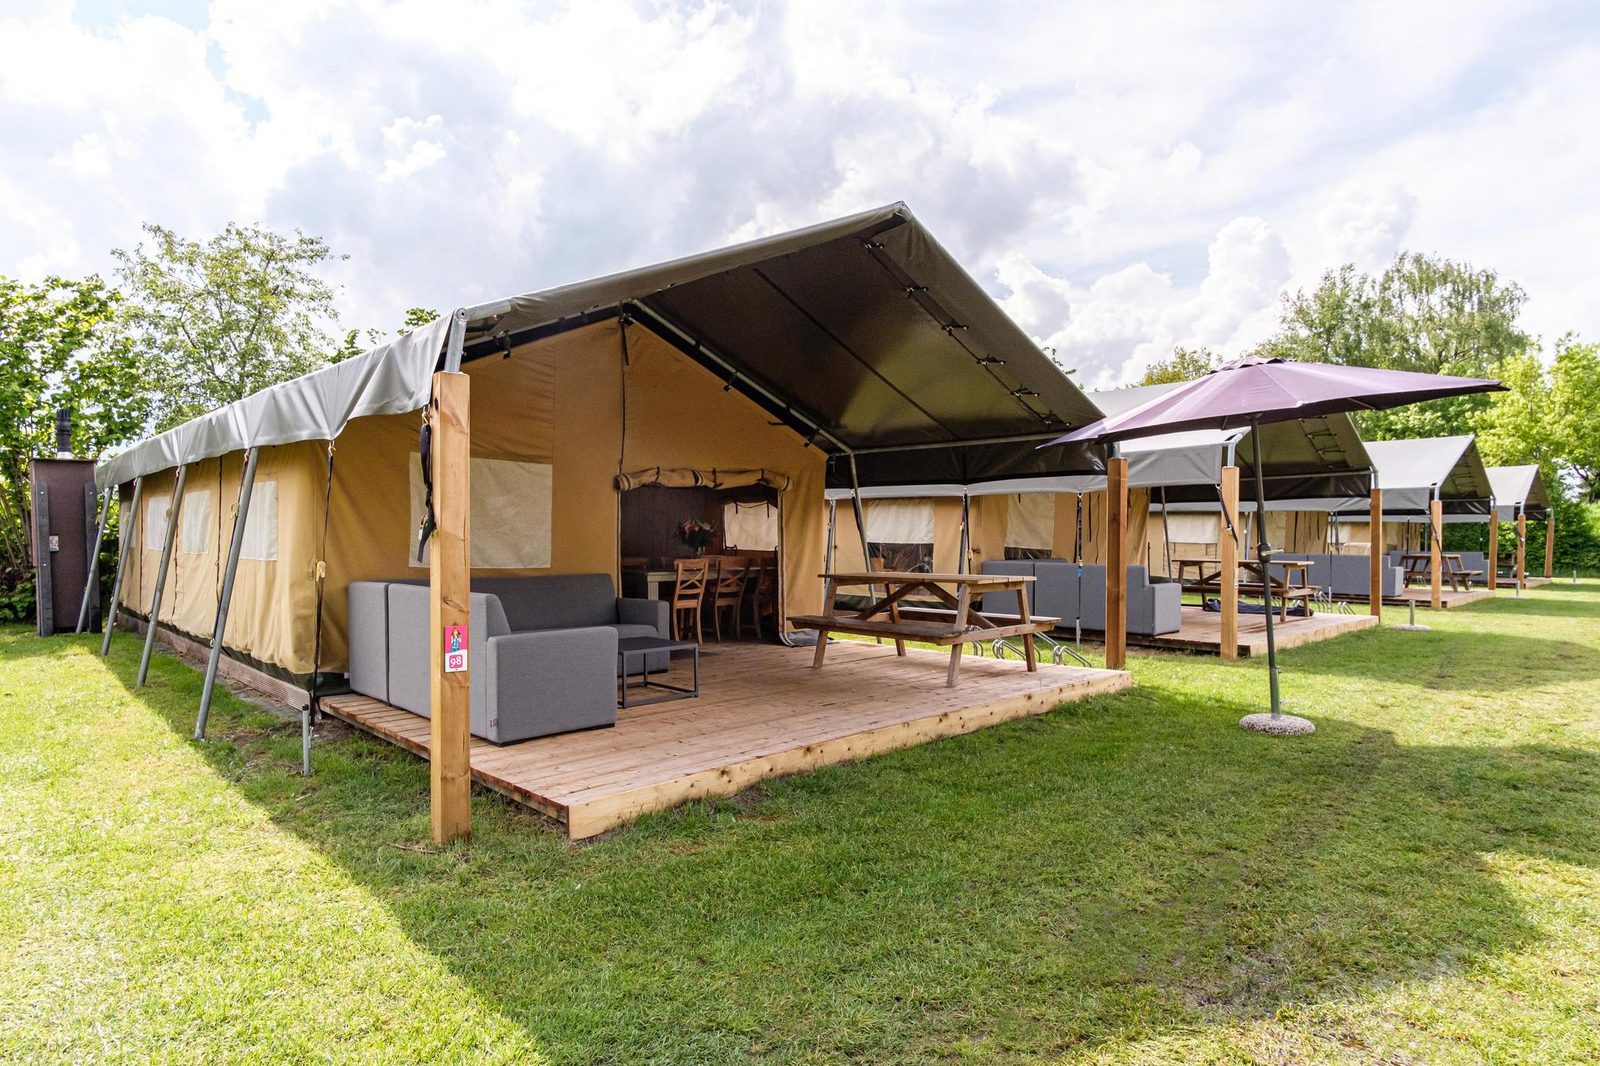 Glamping deals!